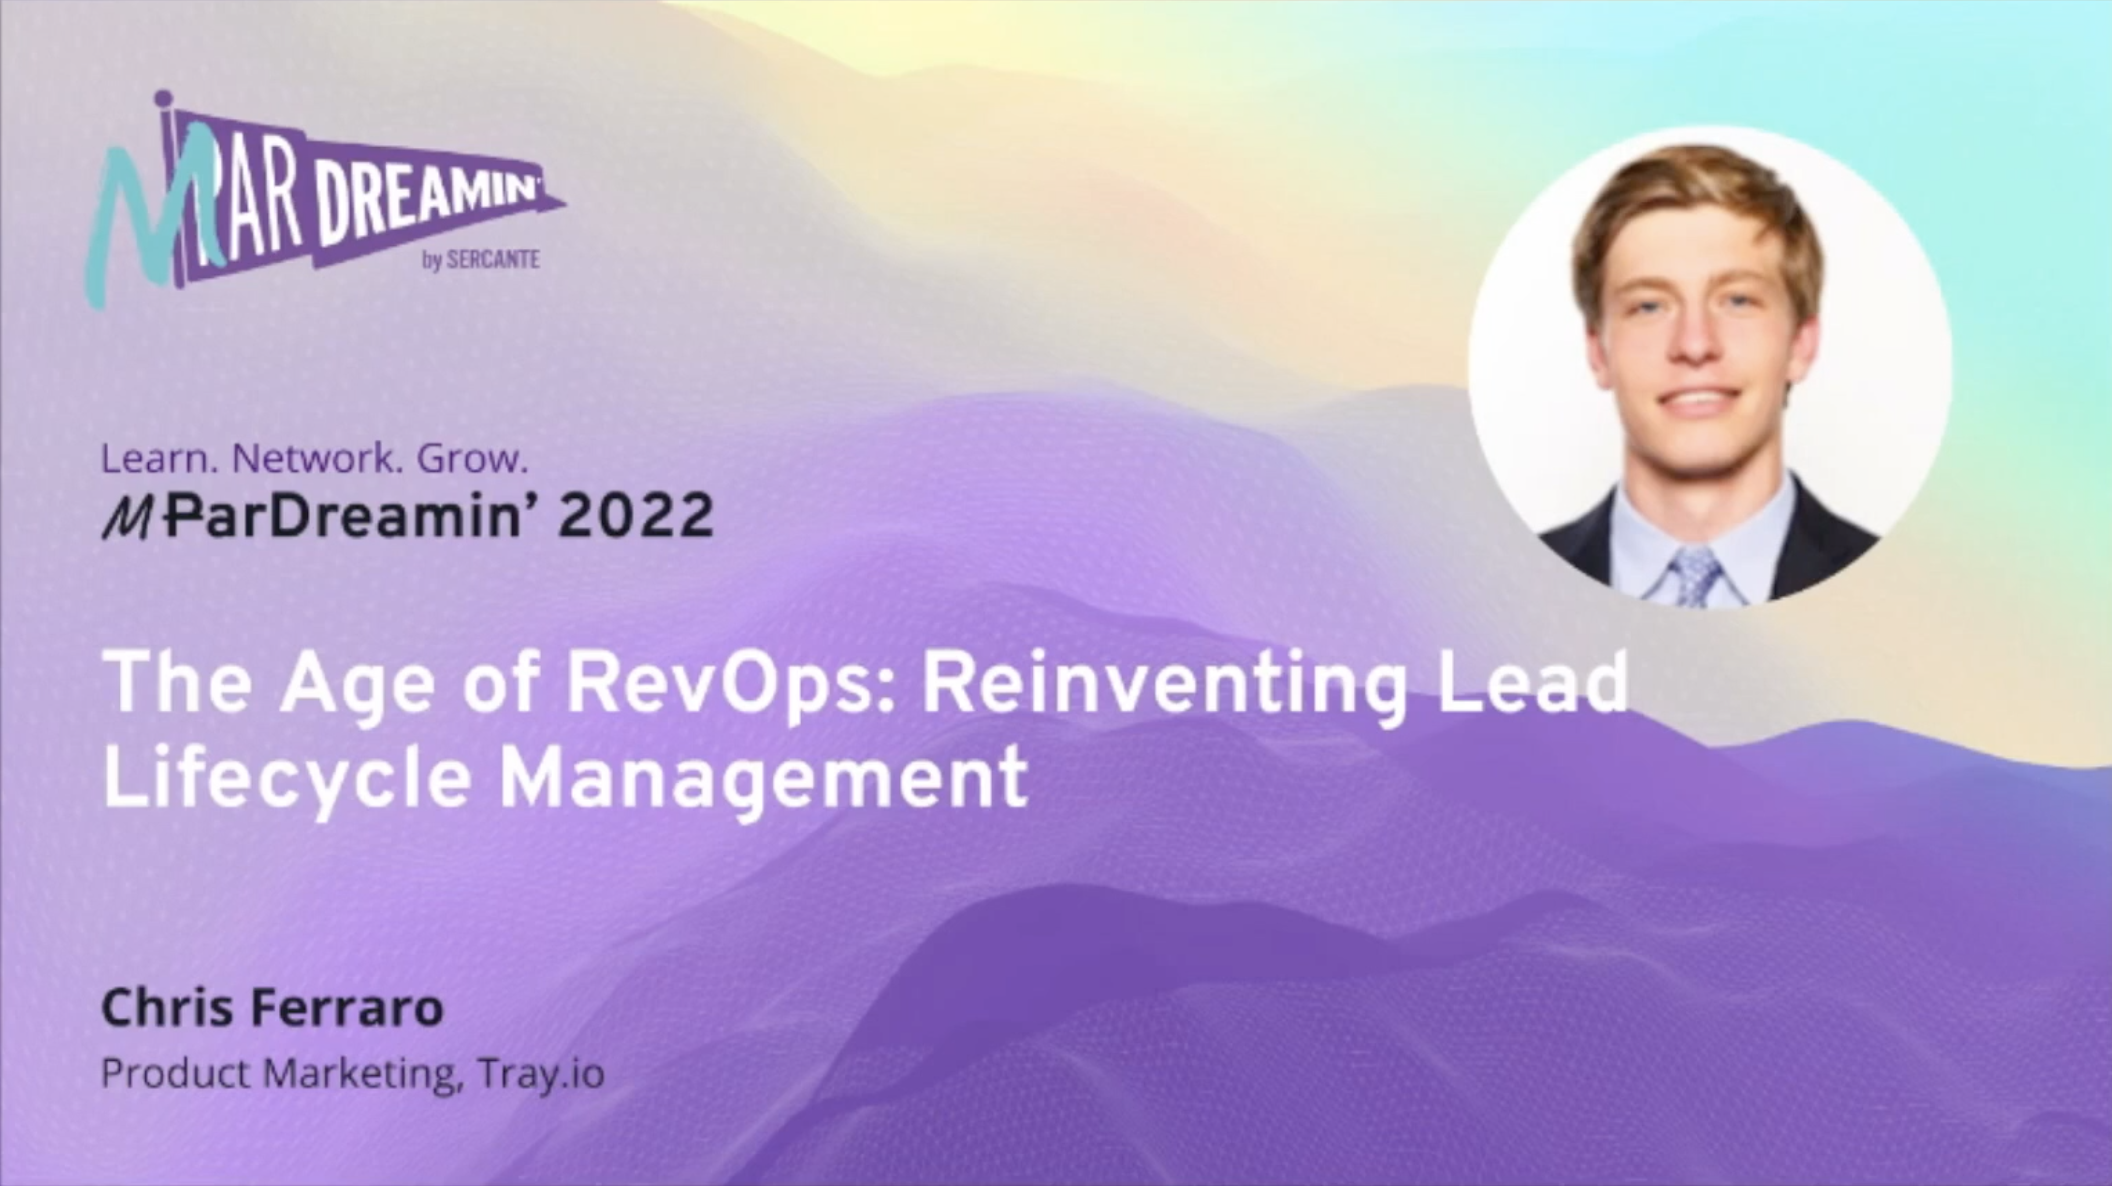 Reinventing Lead Lifecycle Management